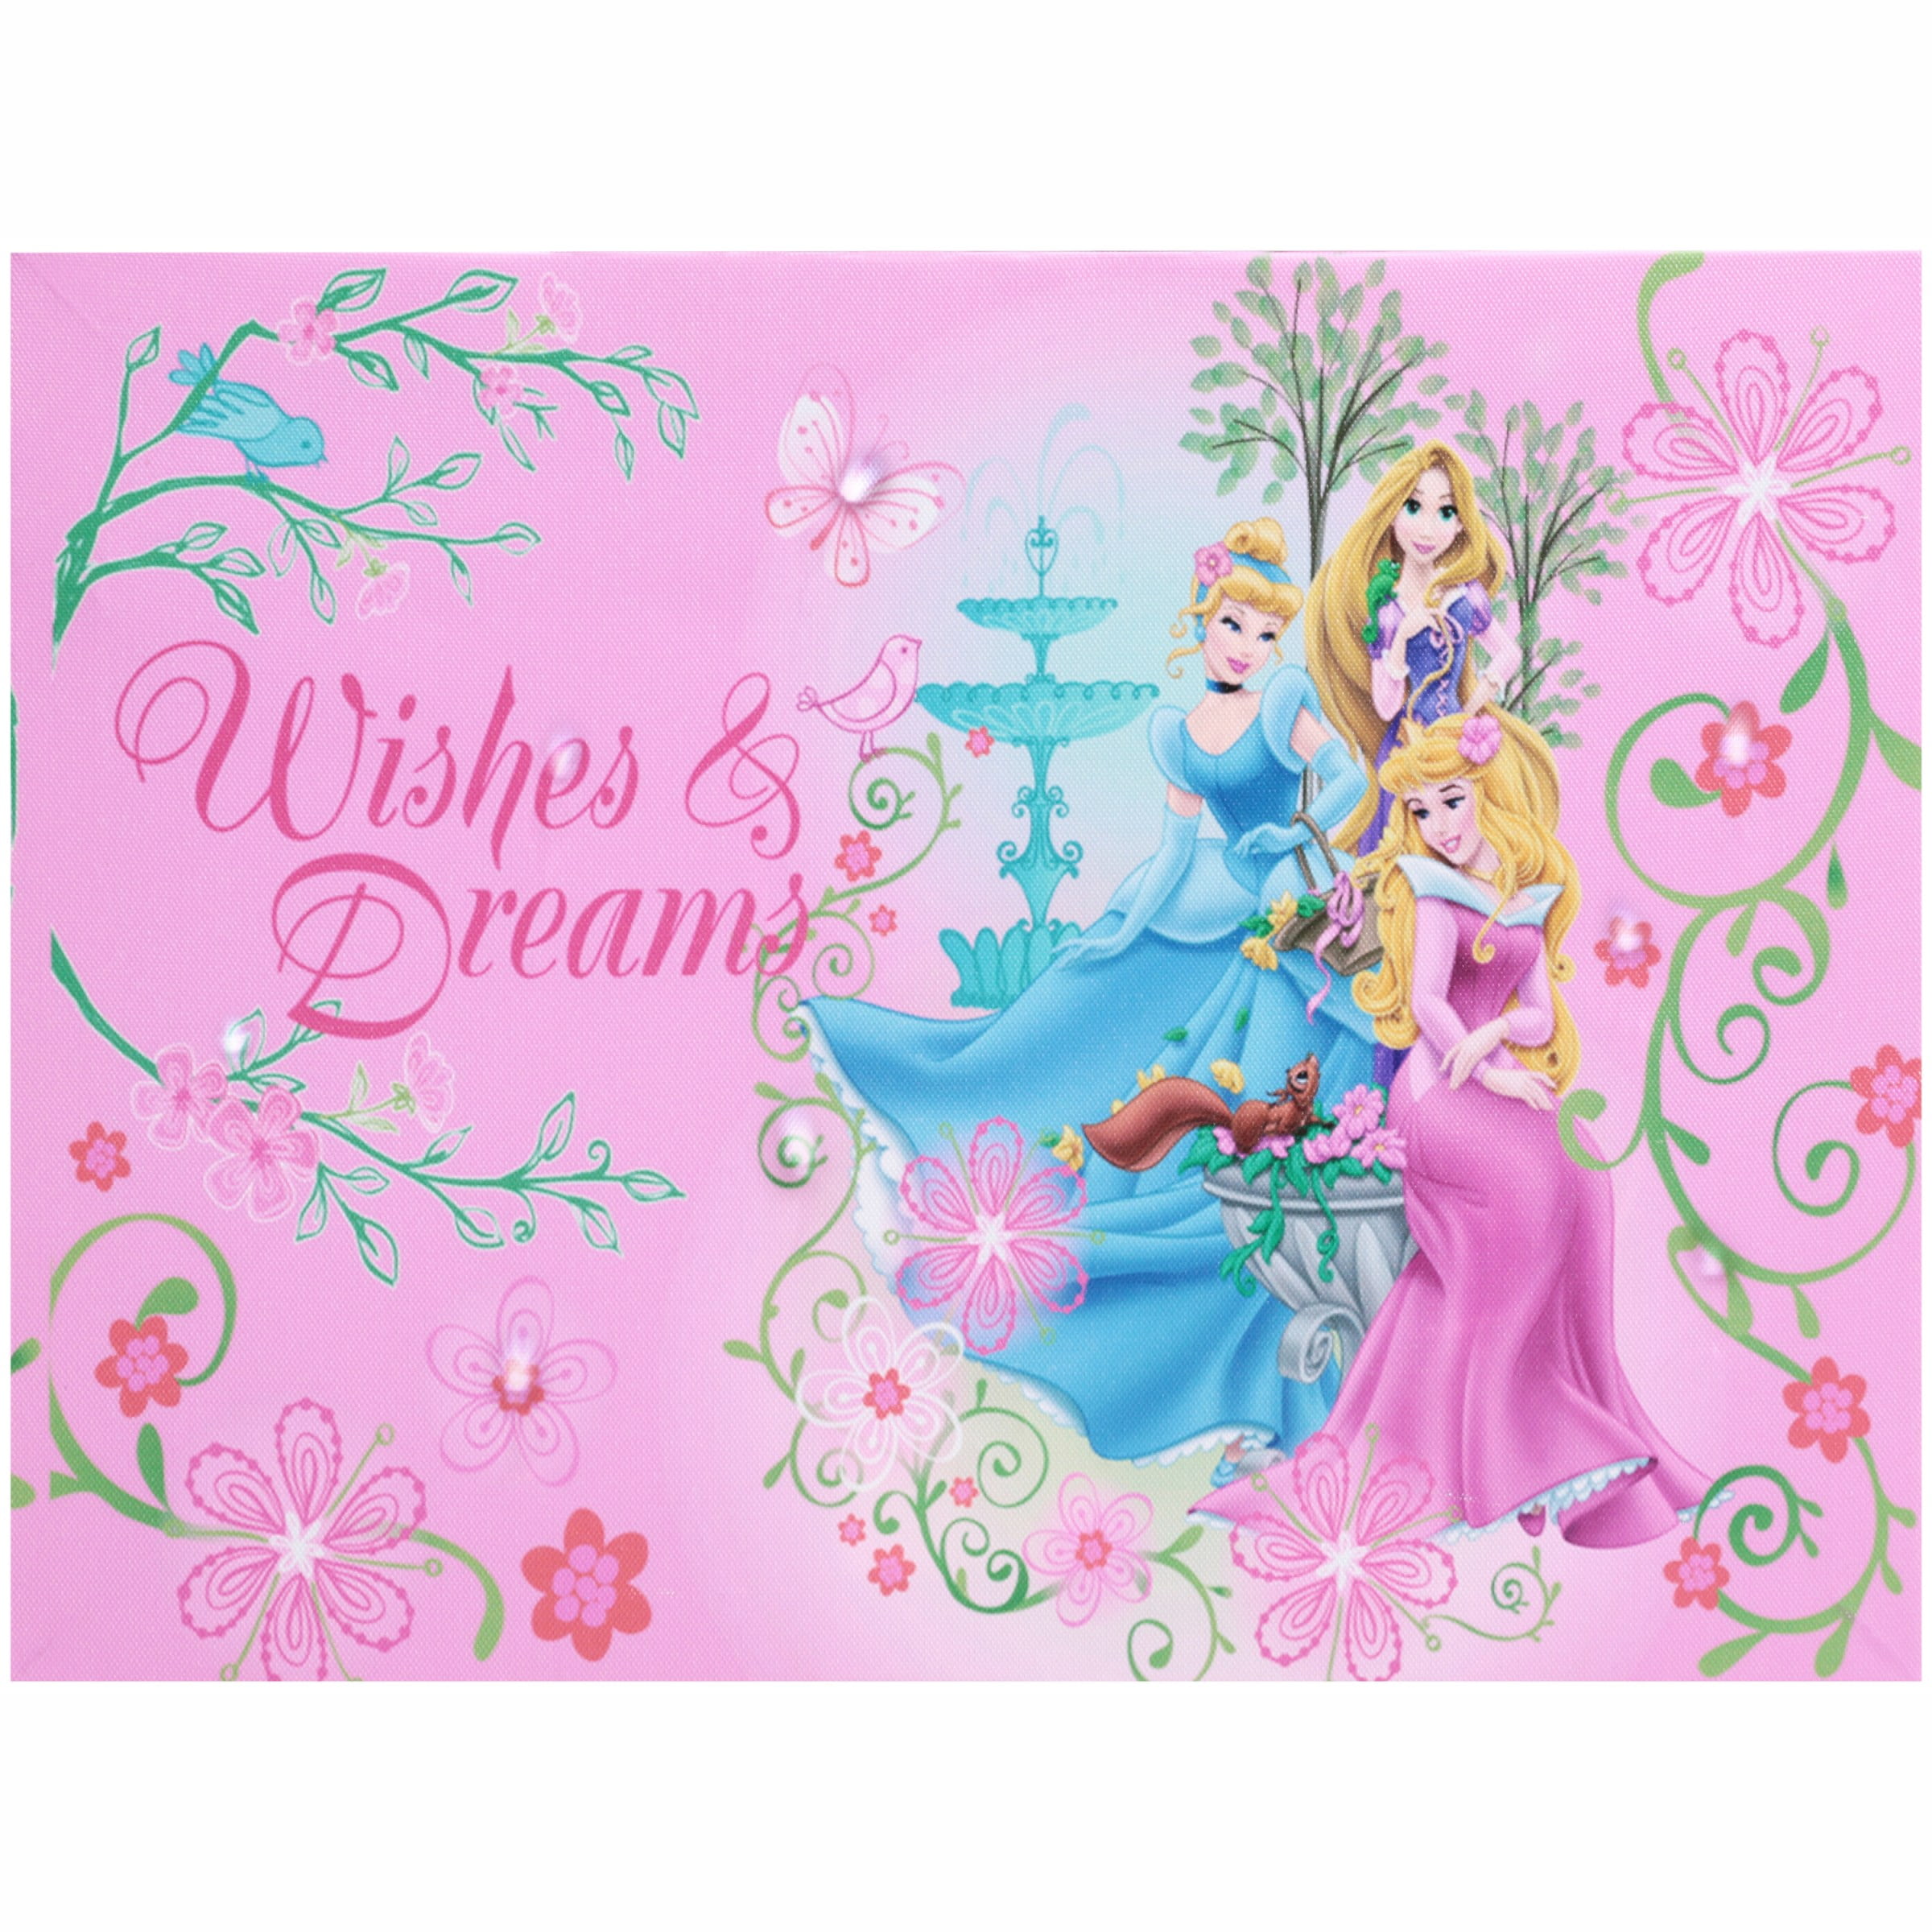 Disney-Characters HD Printed Oil Painting Canvas Wall Children's Room Wall Decor 